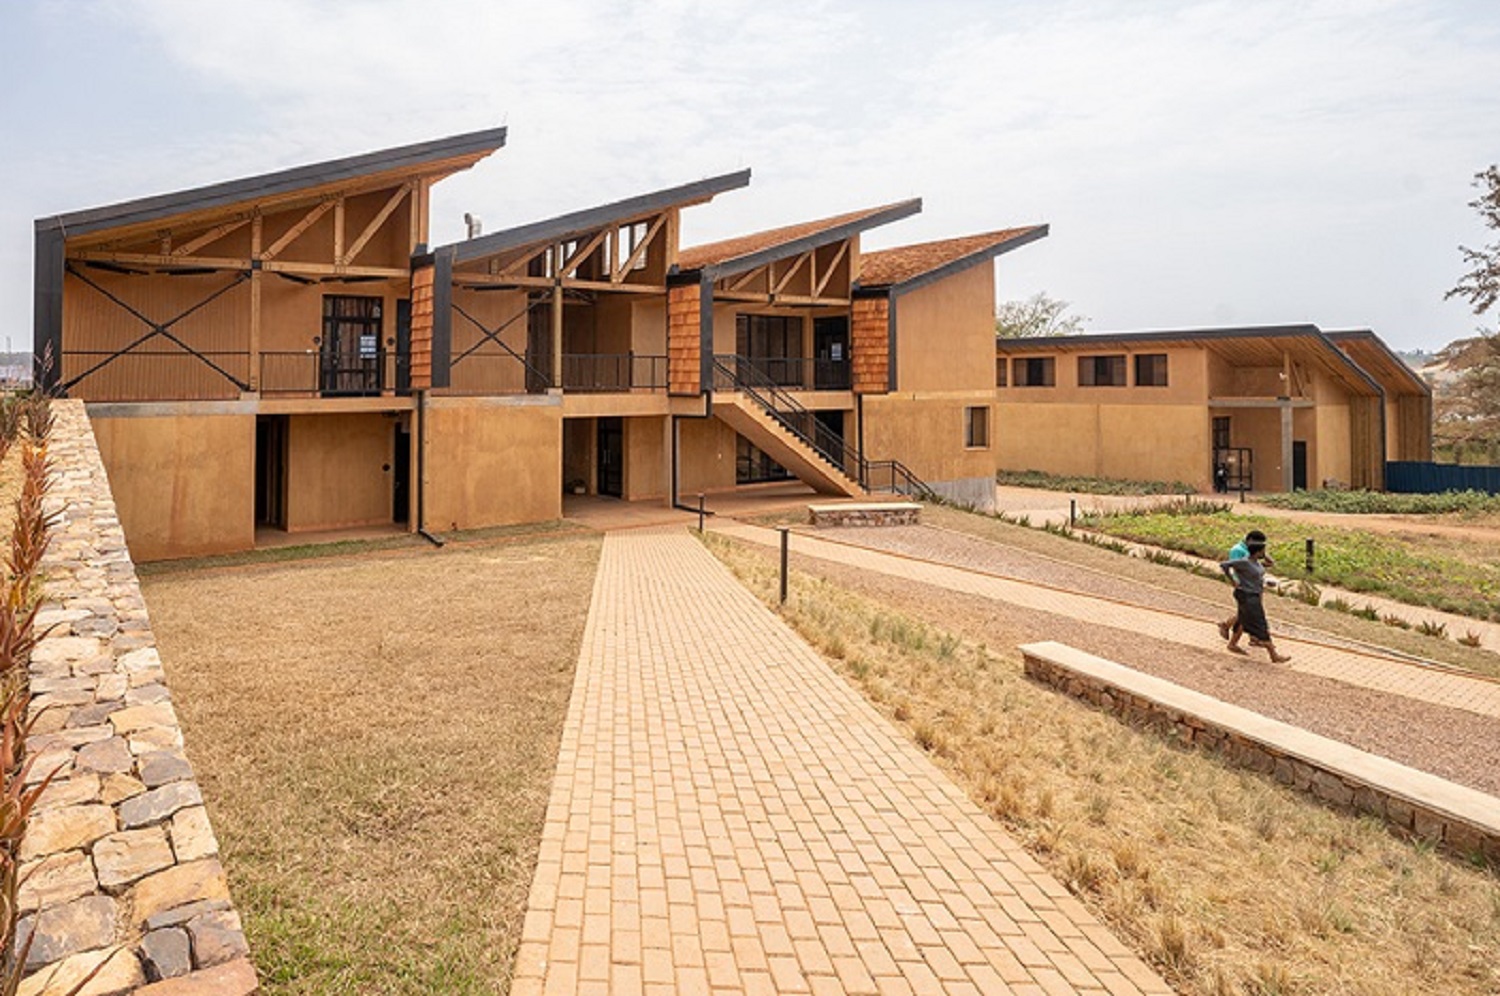 This is an exterior image of the Rwanda Institute for Conservation Agriculture